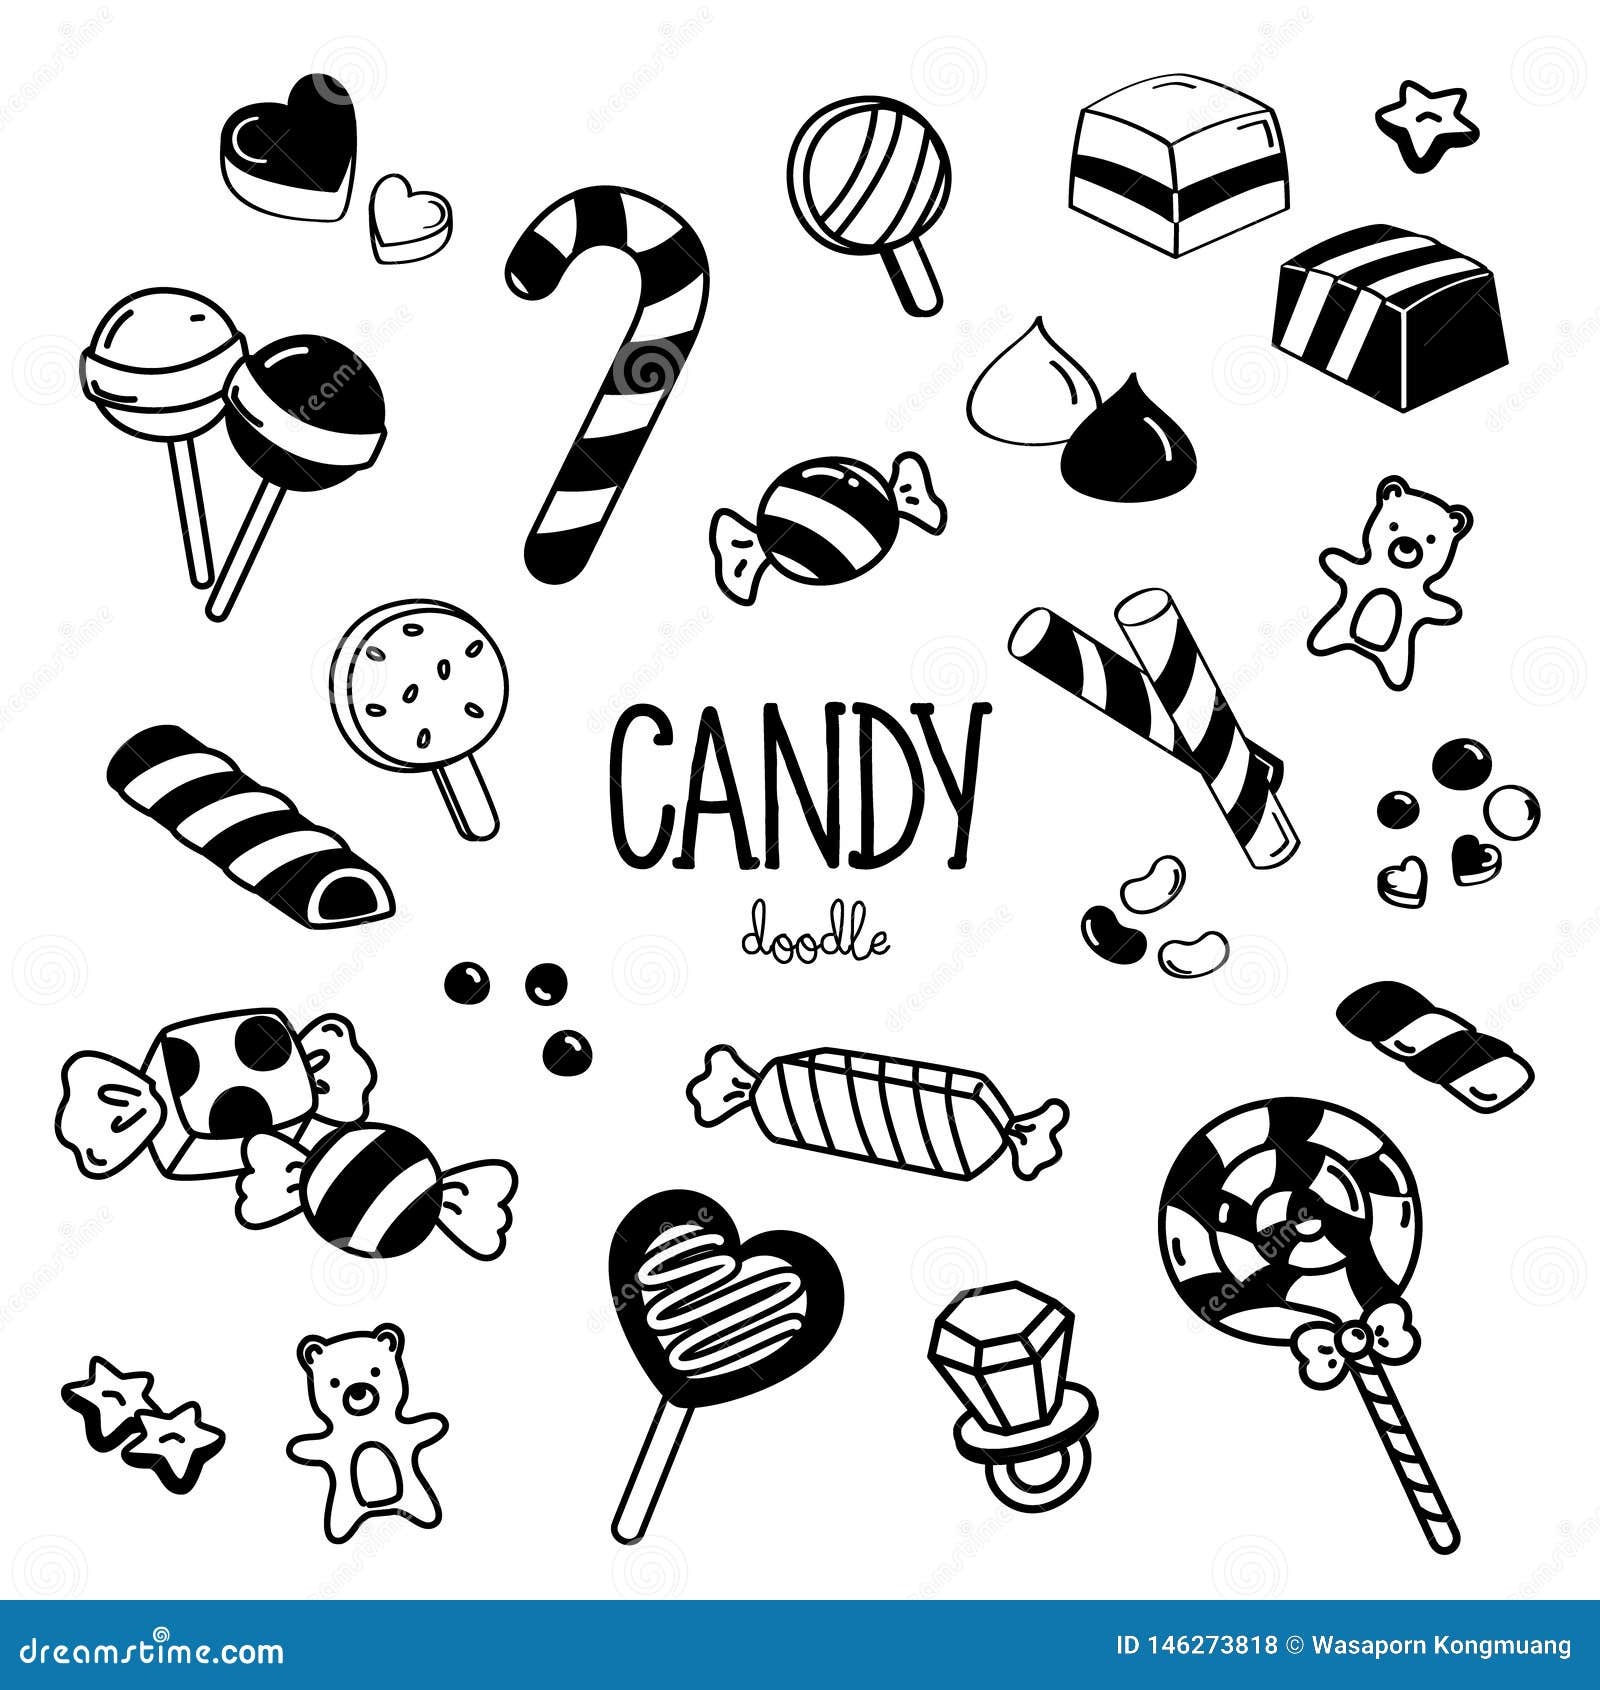 How to Draw Sweets (Candy & Desserts) - HelloArtsy